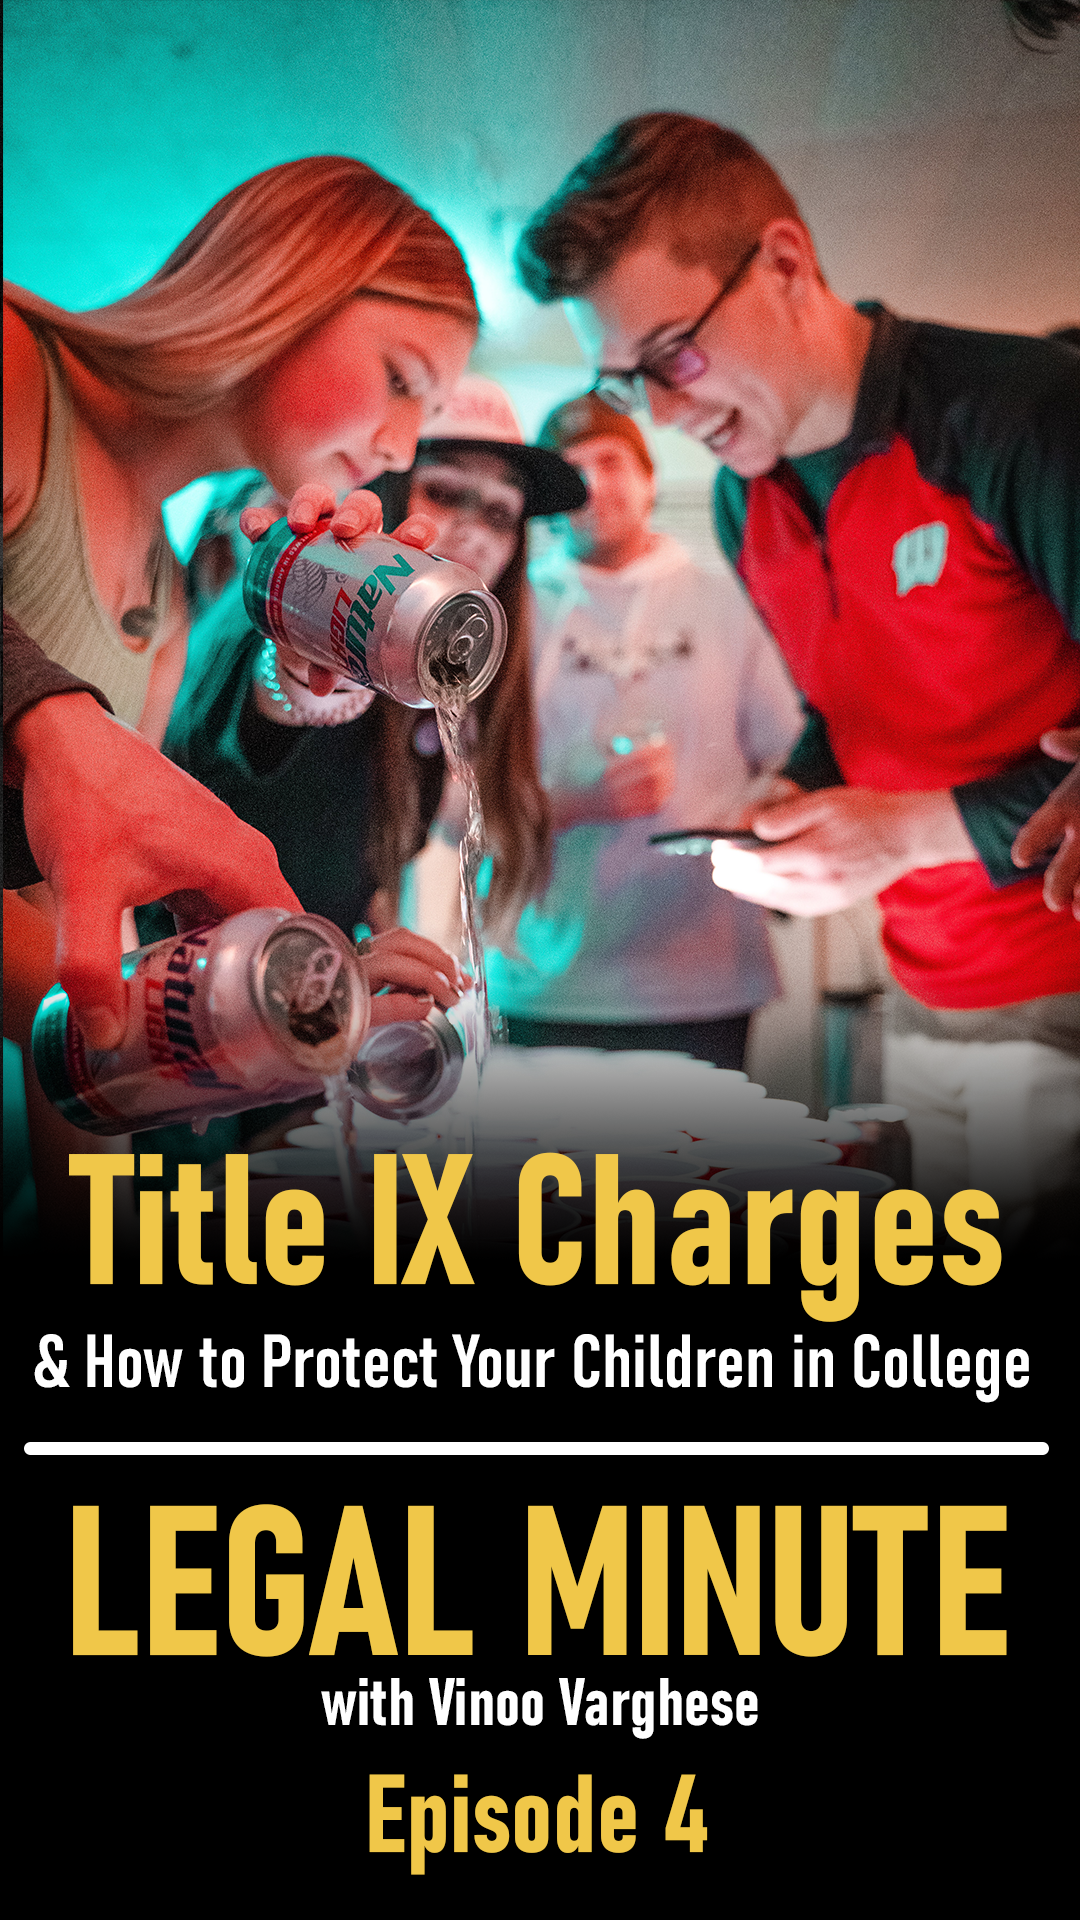 TItle IX Charges & How to Protect Your Children in College – Legal Minute Ep. 4